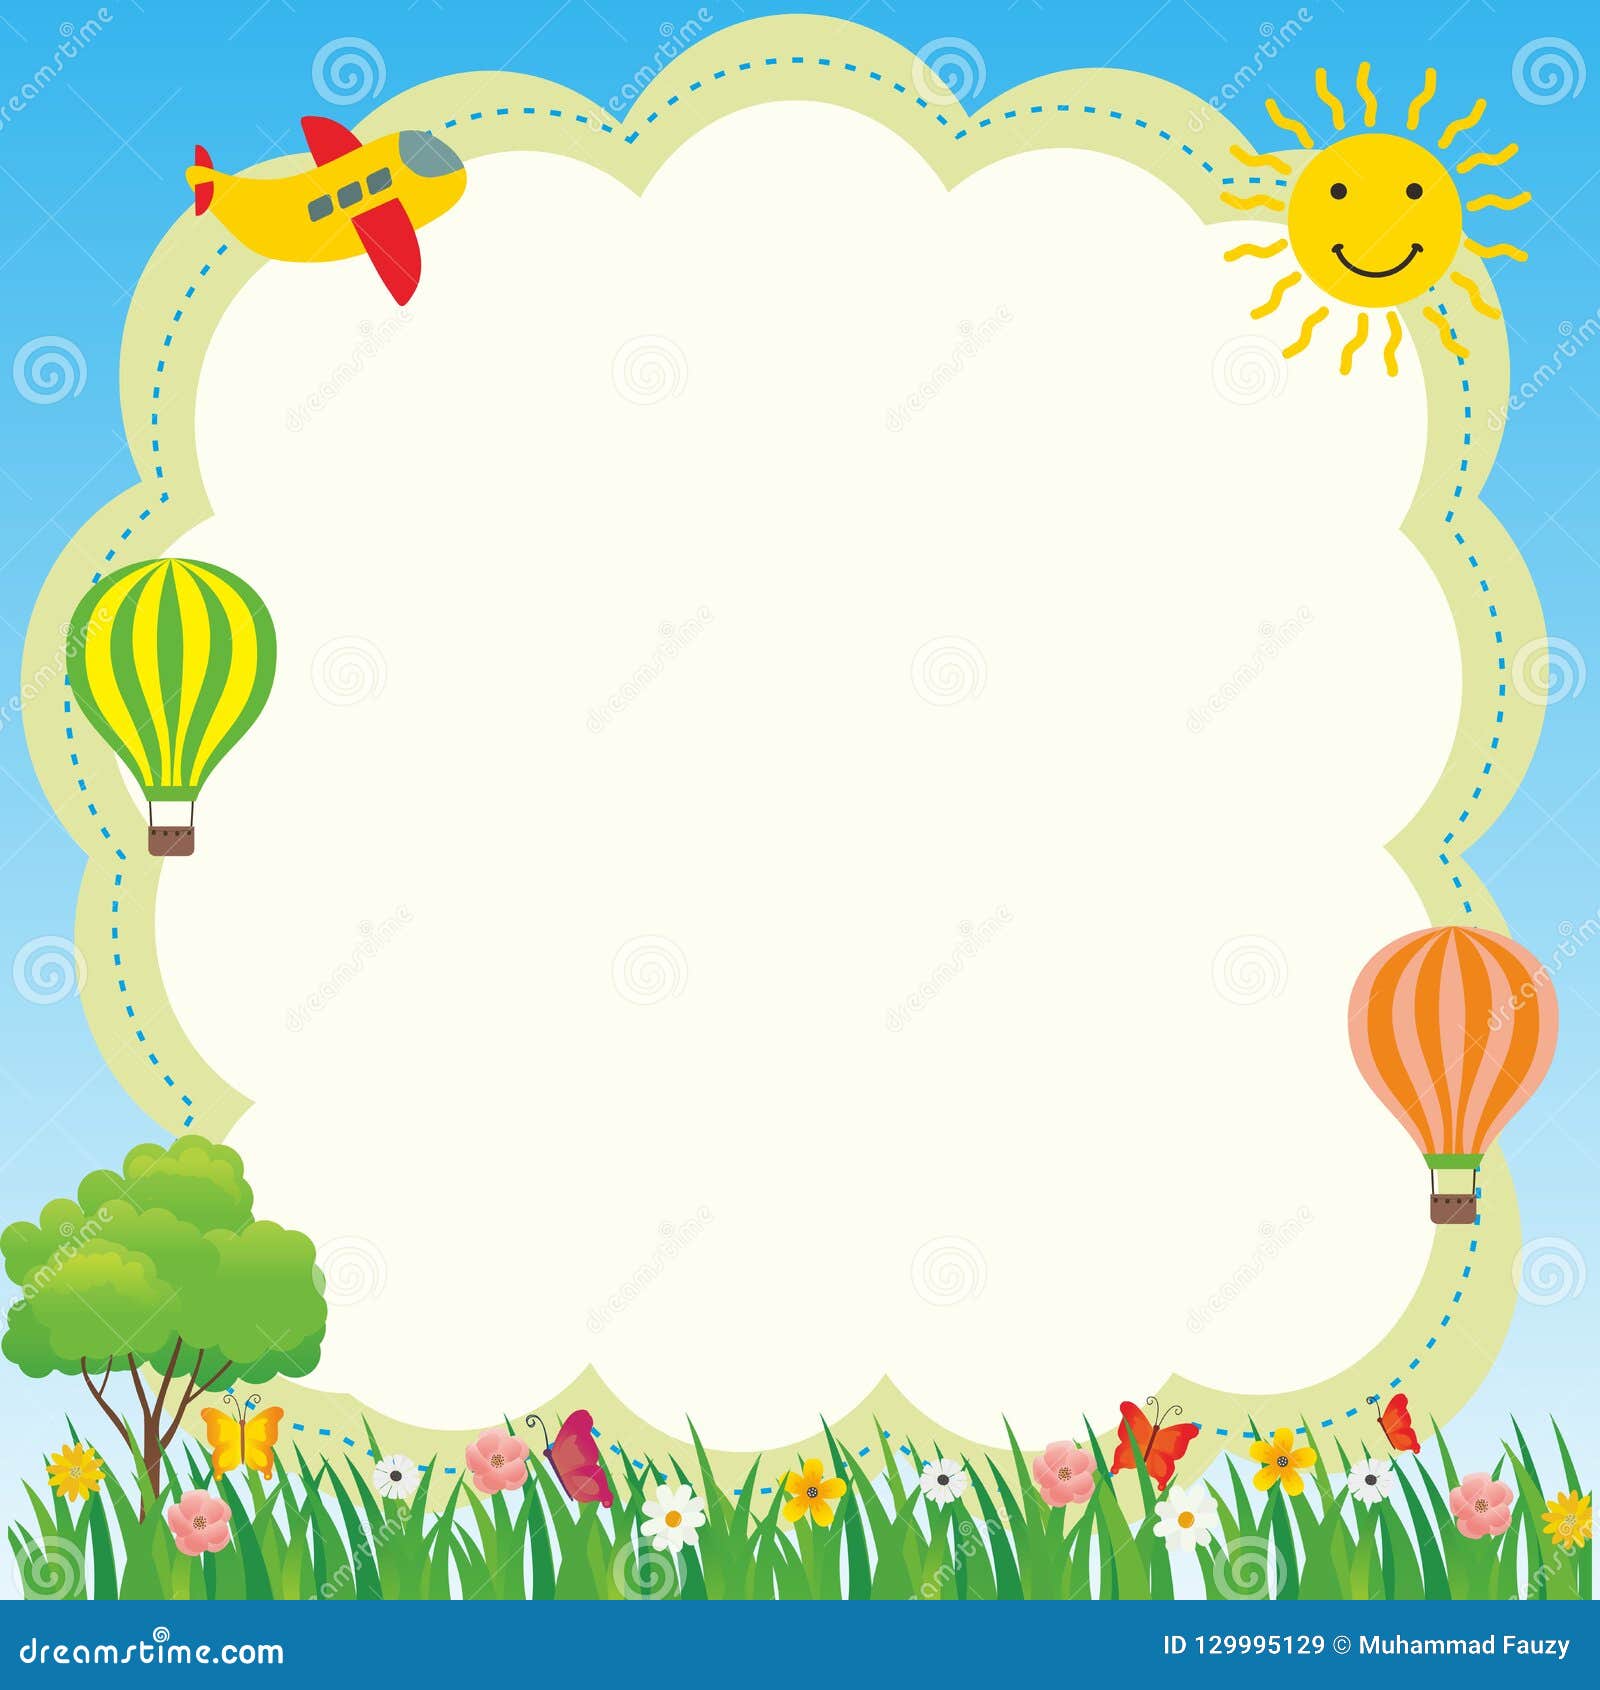 Cute and Funny Frame with Landscape Cartoon Stock Vector - Illustration of  design, carton: 129995129